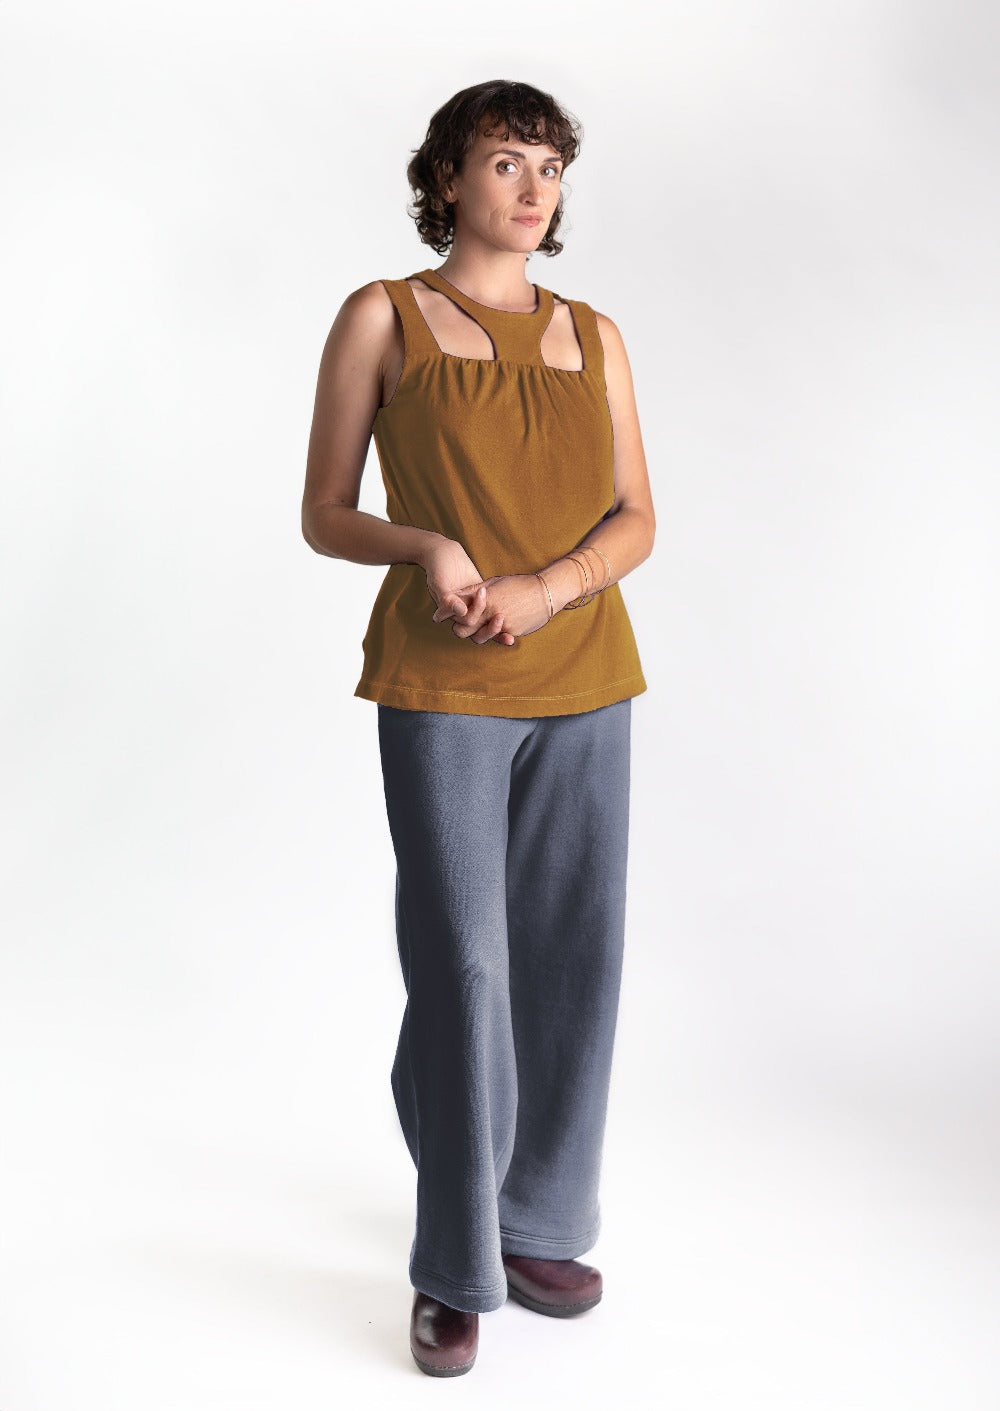 fashionable woman in a medically accessible adaptive wear tank top 